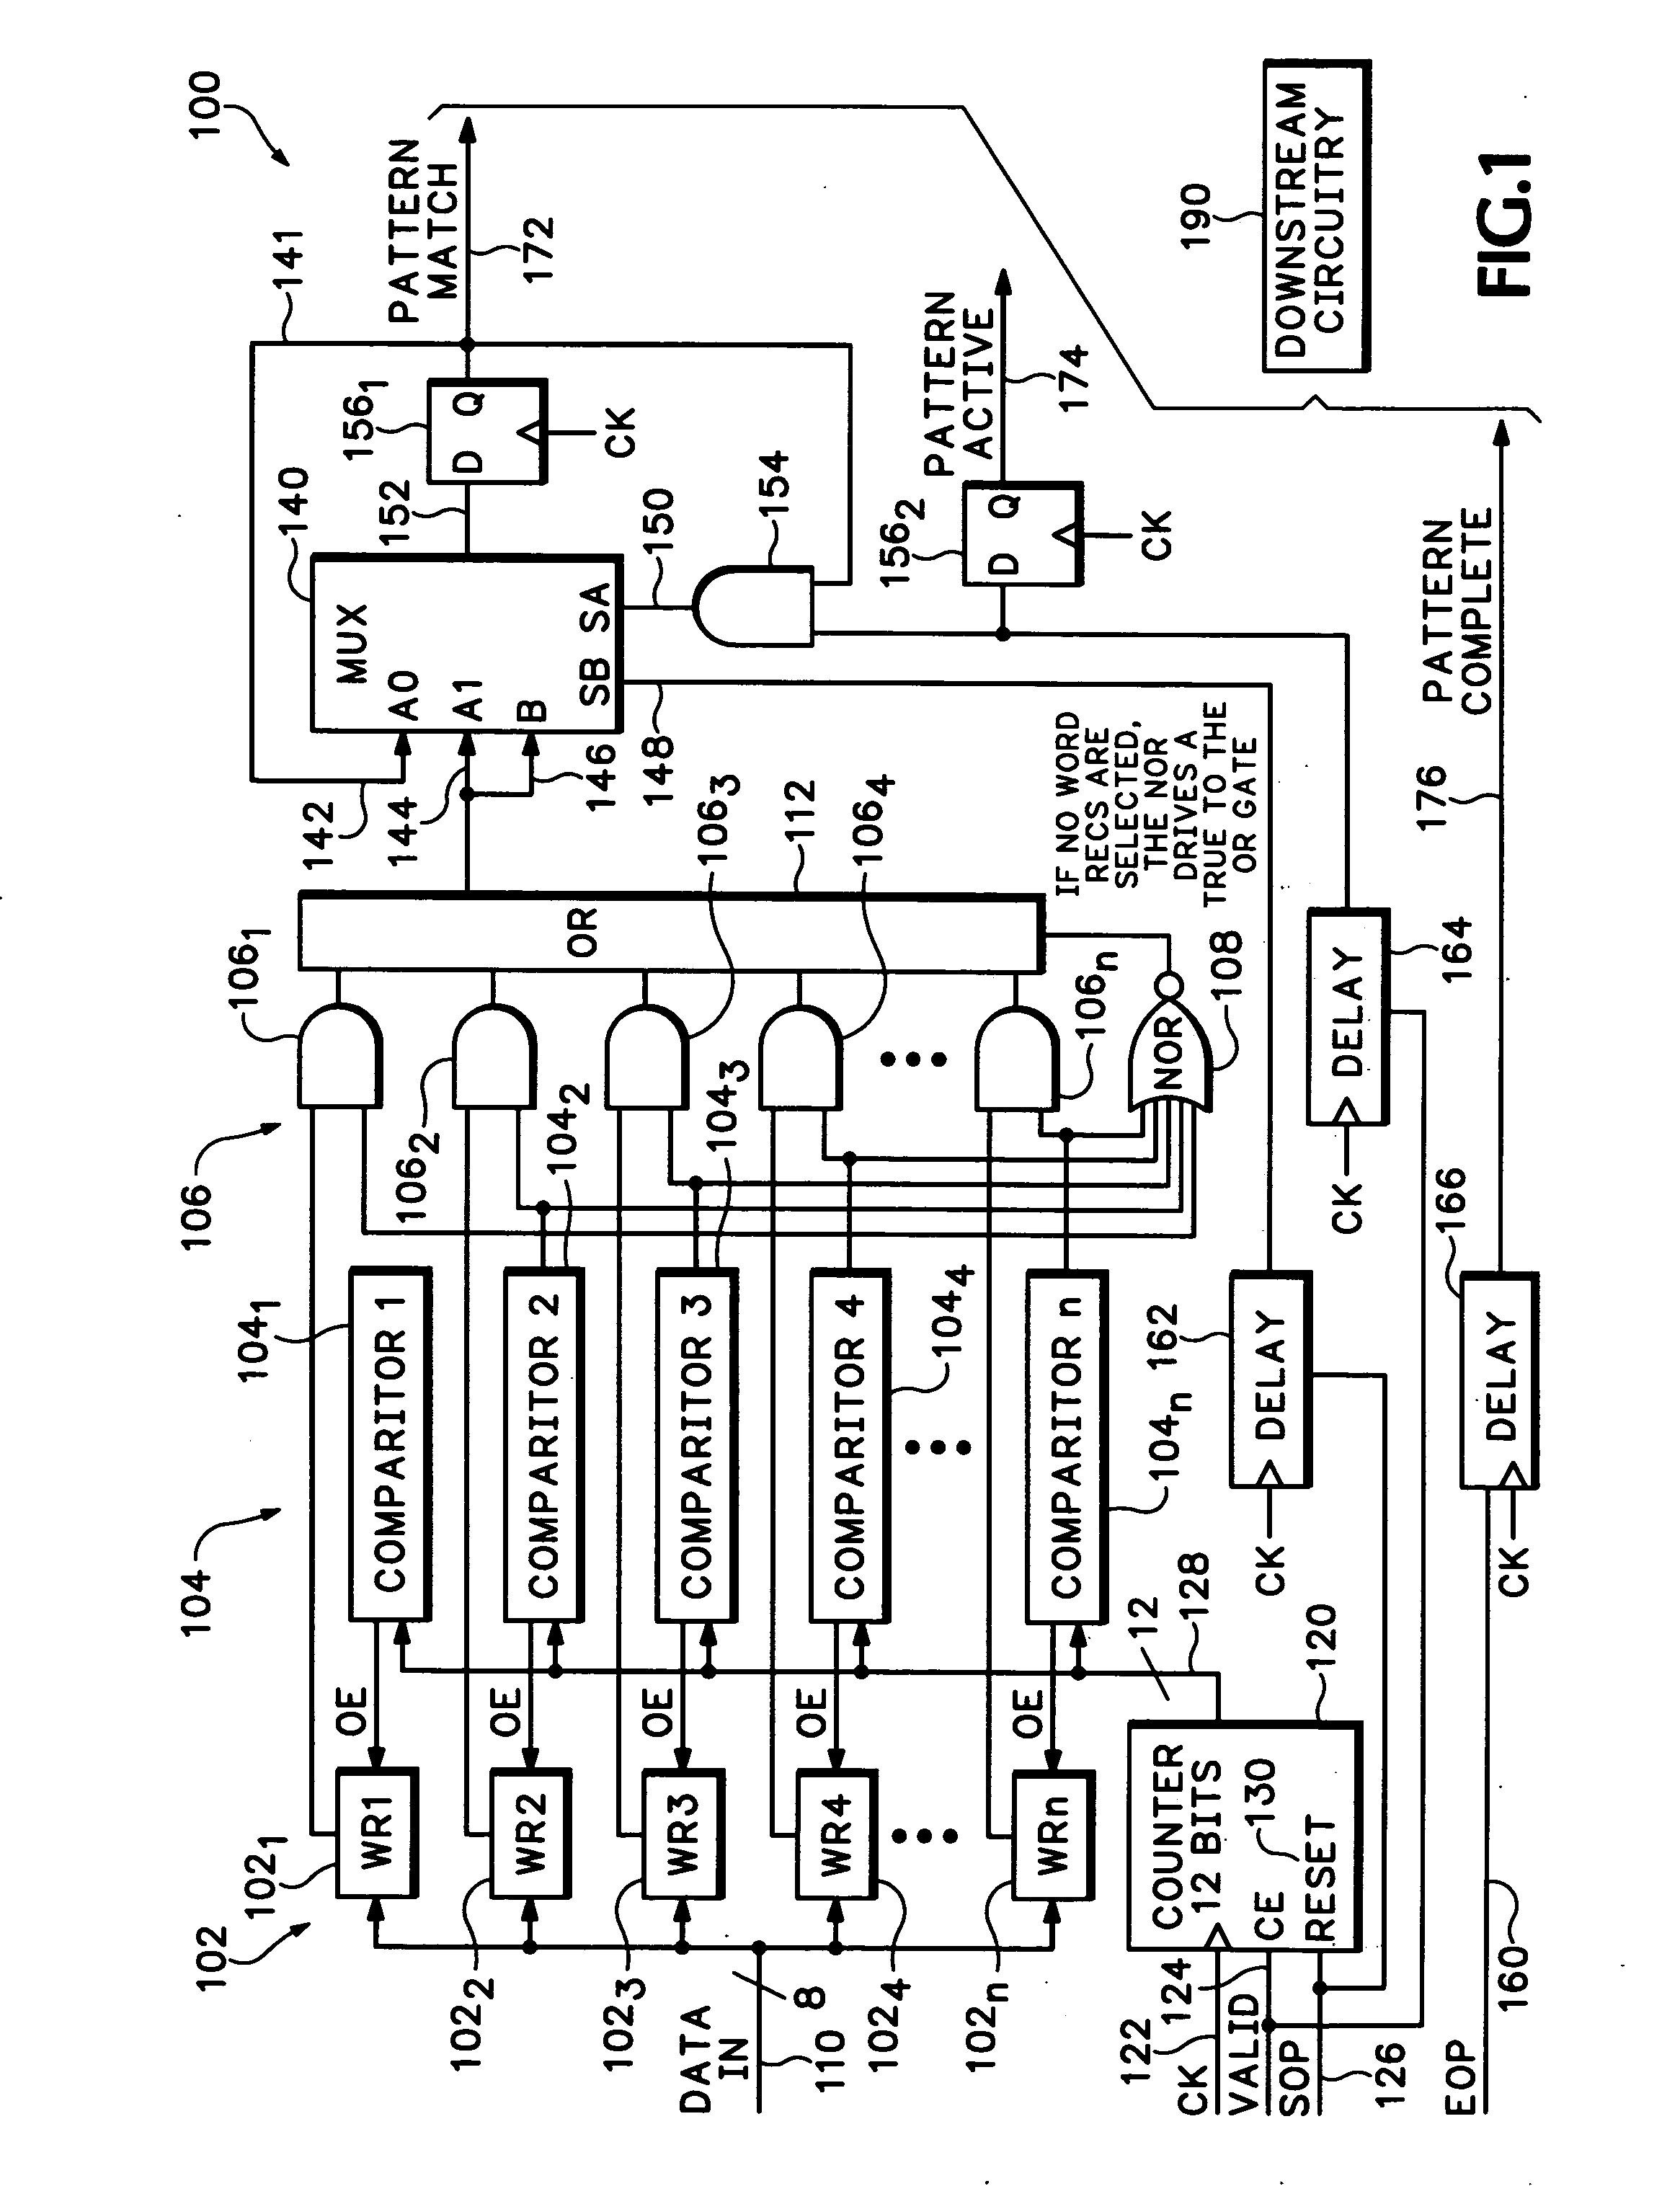 Apparatus and method of analyzing packetized data spanning over multiple clock cycles